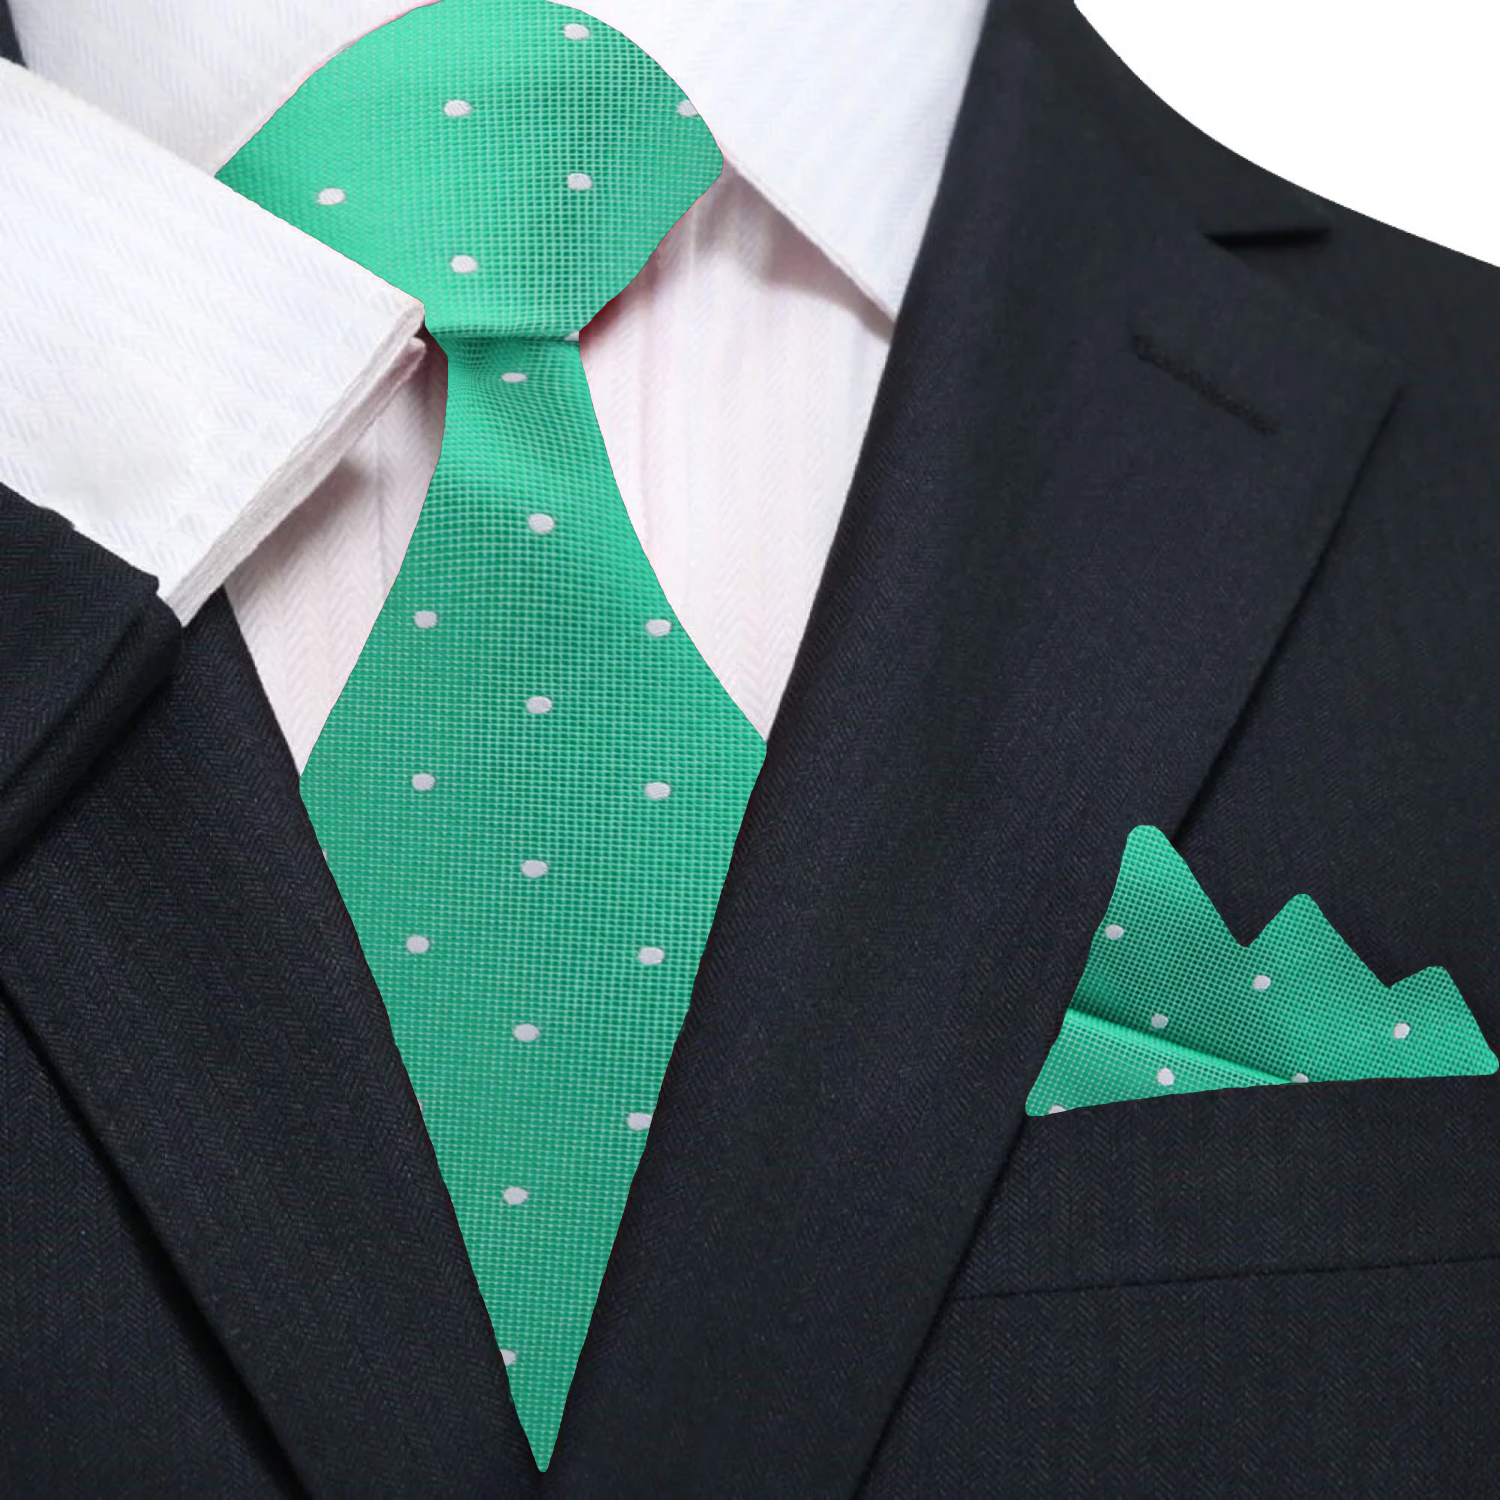 Primary Green Polka Tie and Square